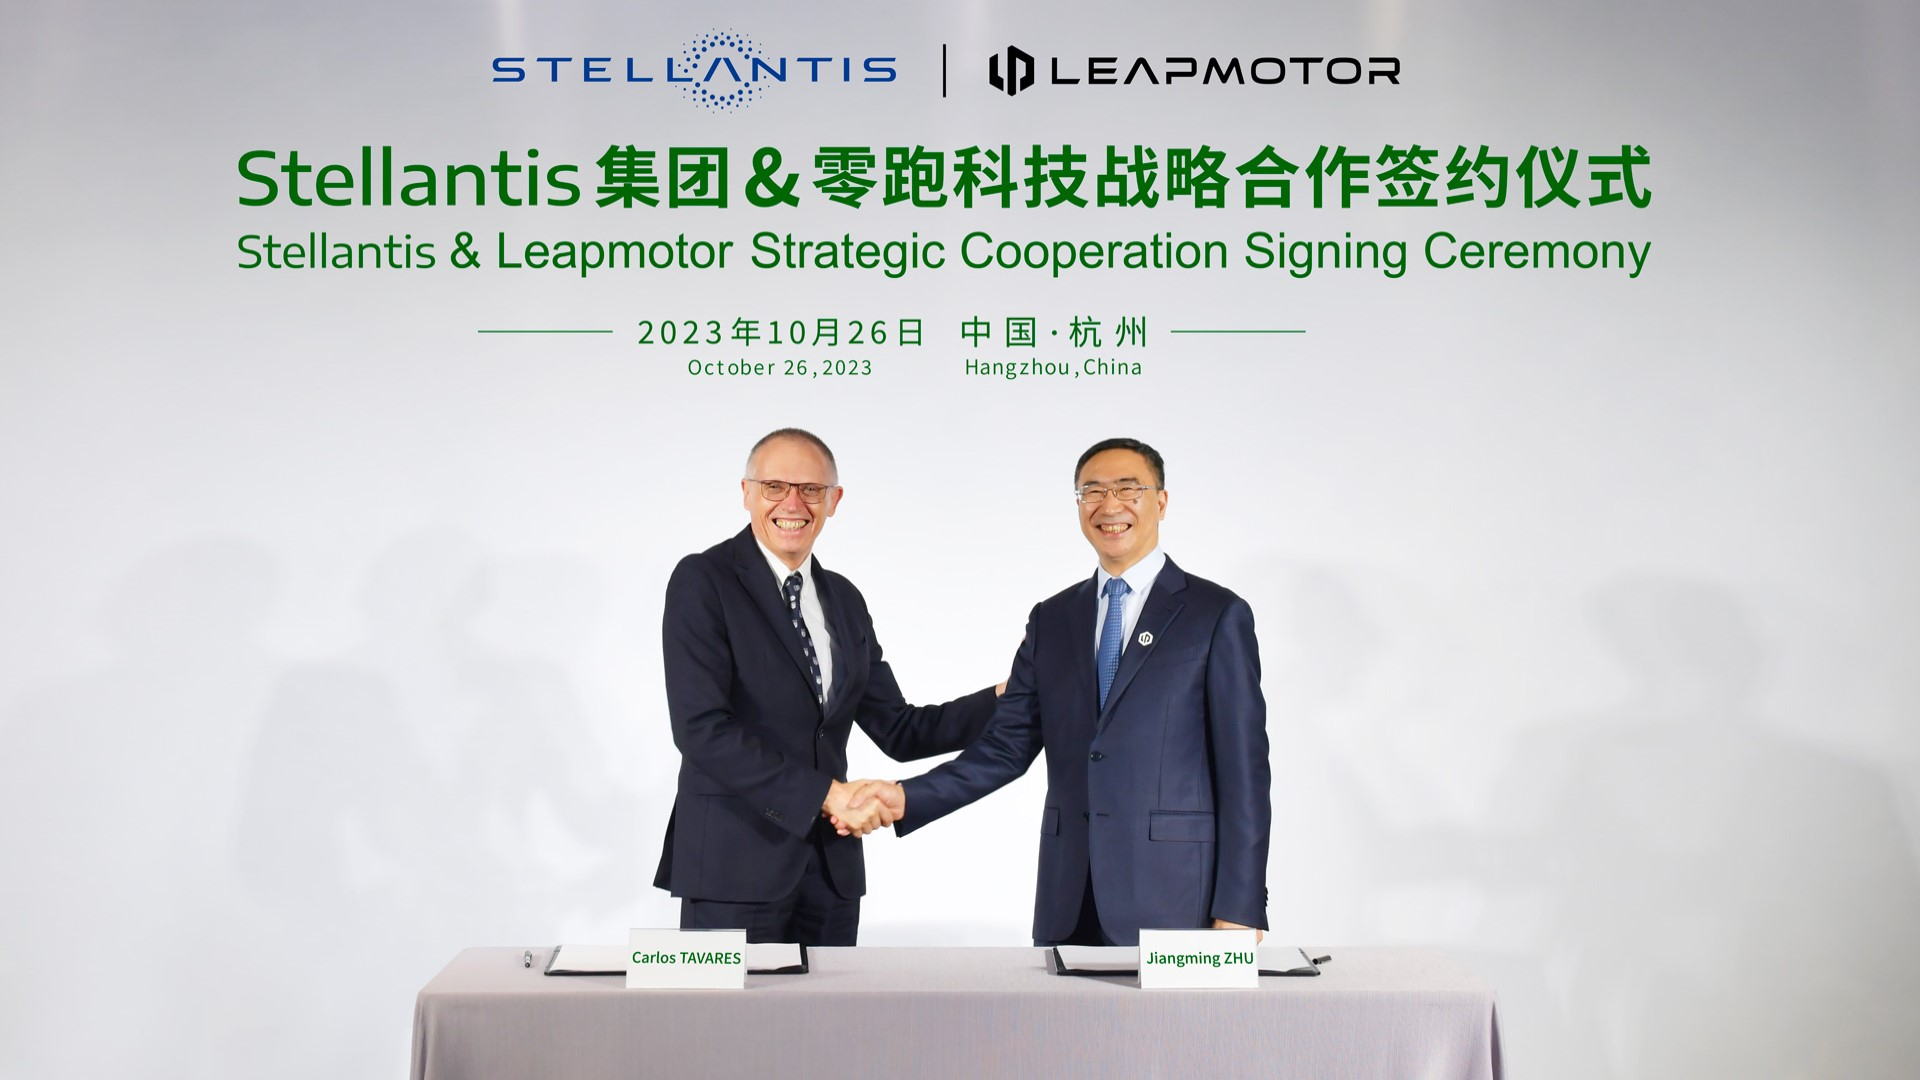 Stellantis Acquired Shares of Leapmotor